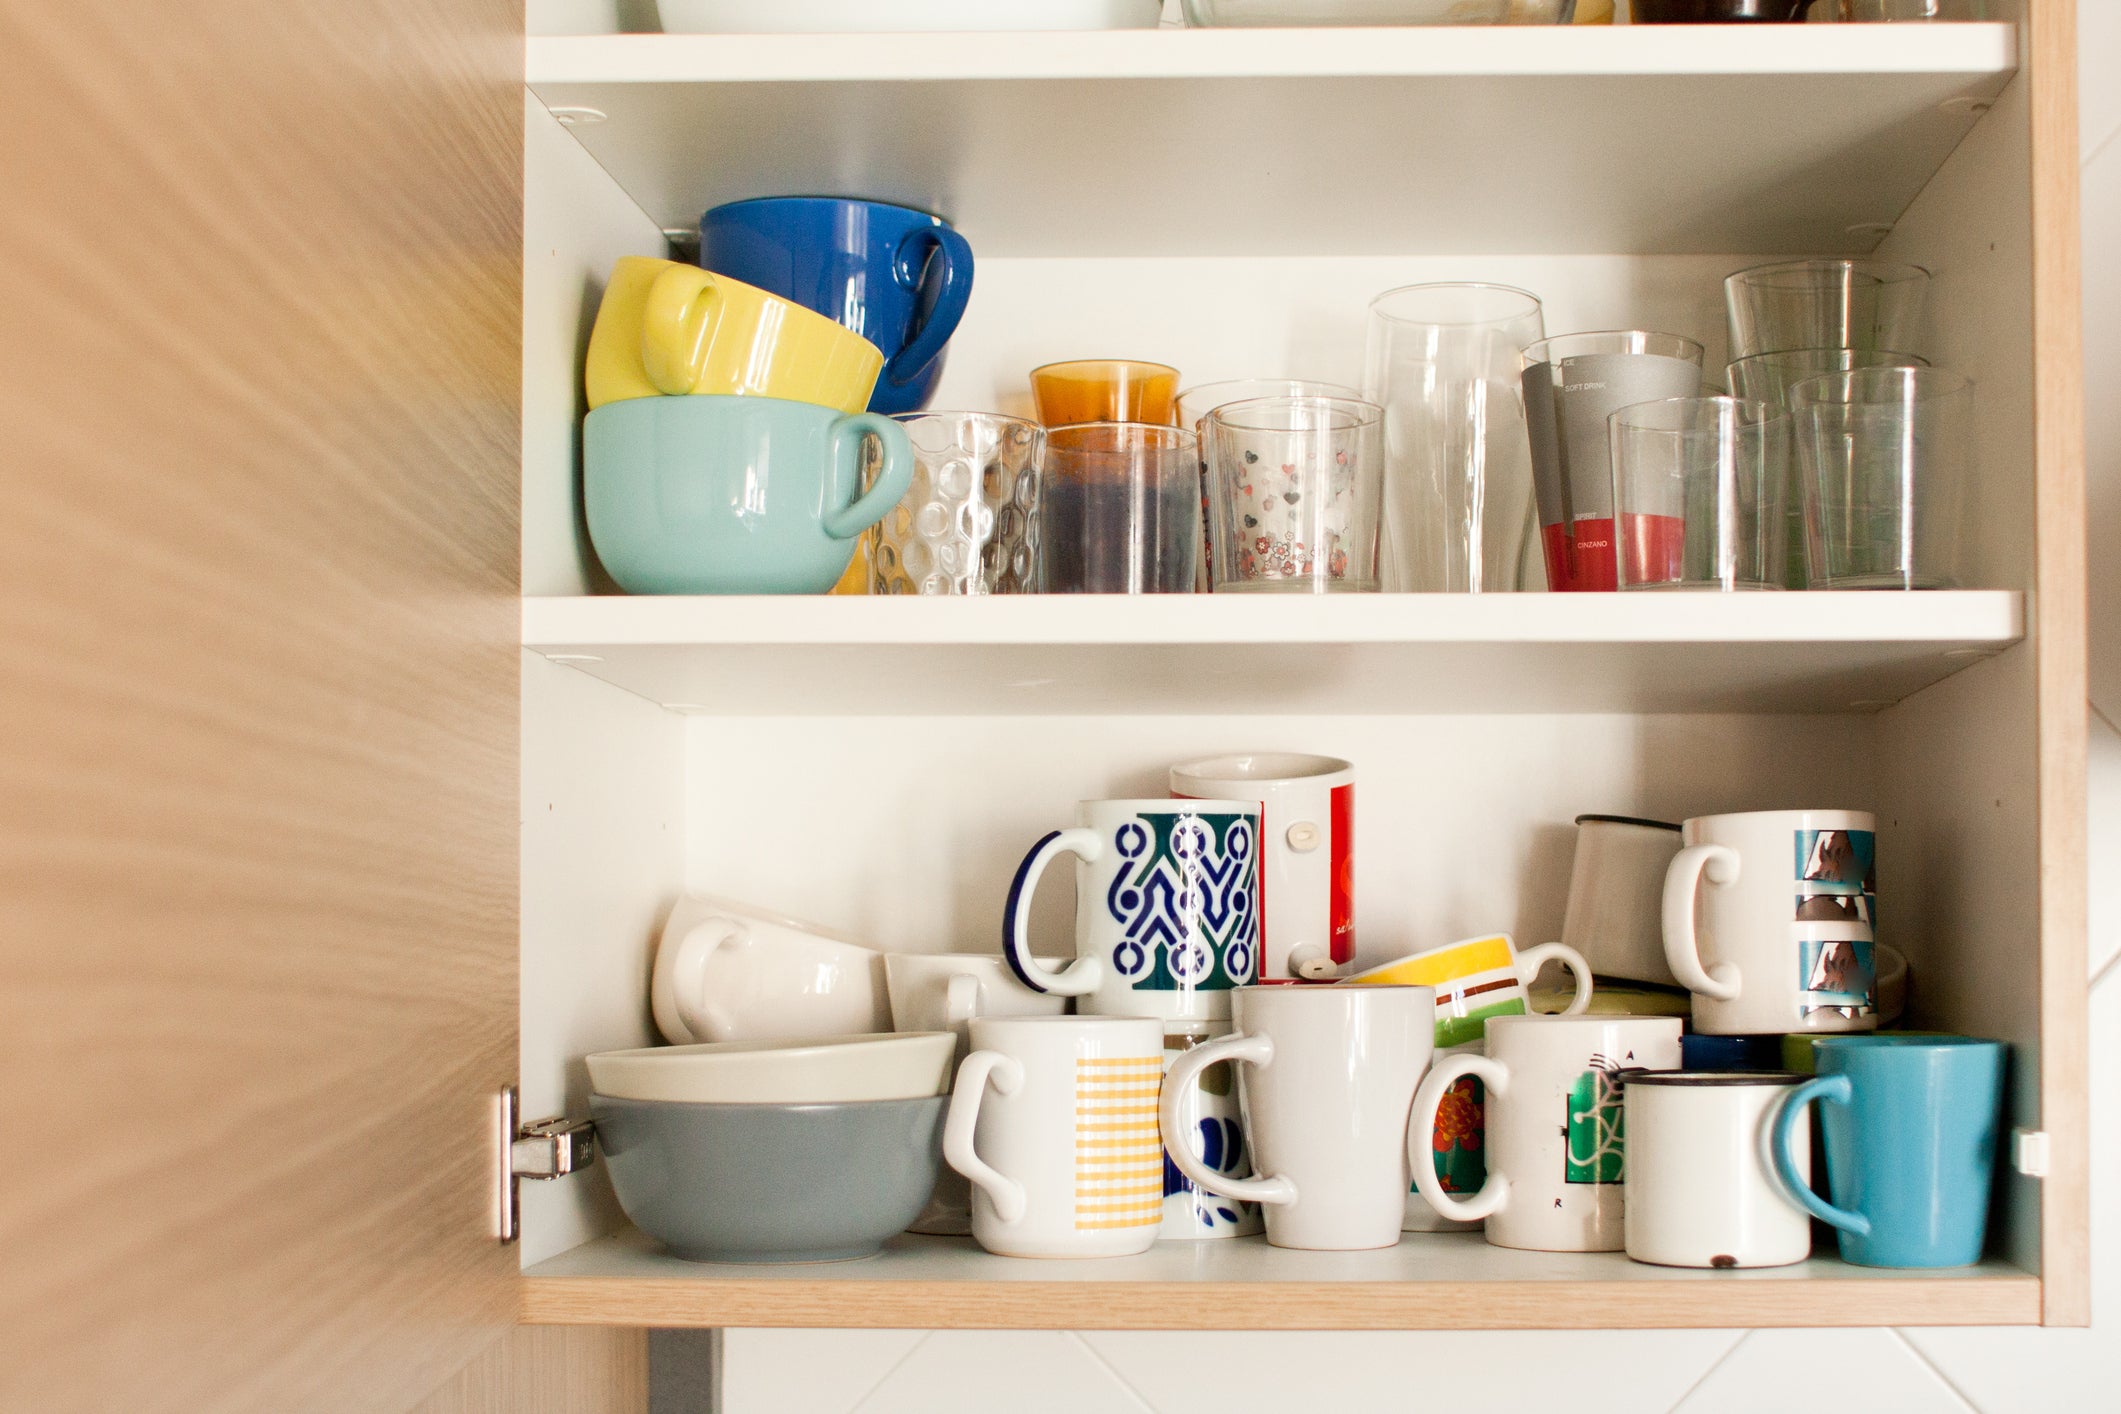 Organize Your Kitchen With These Easy Hacks